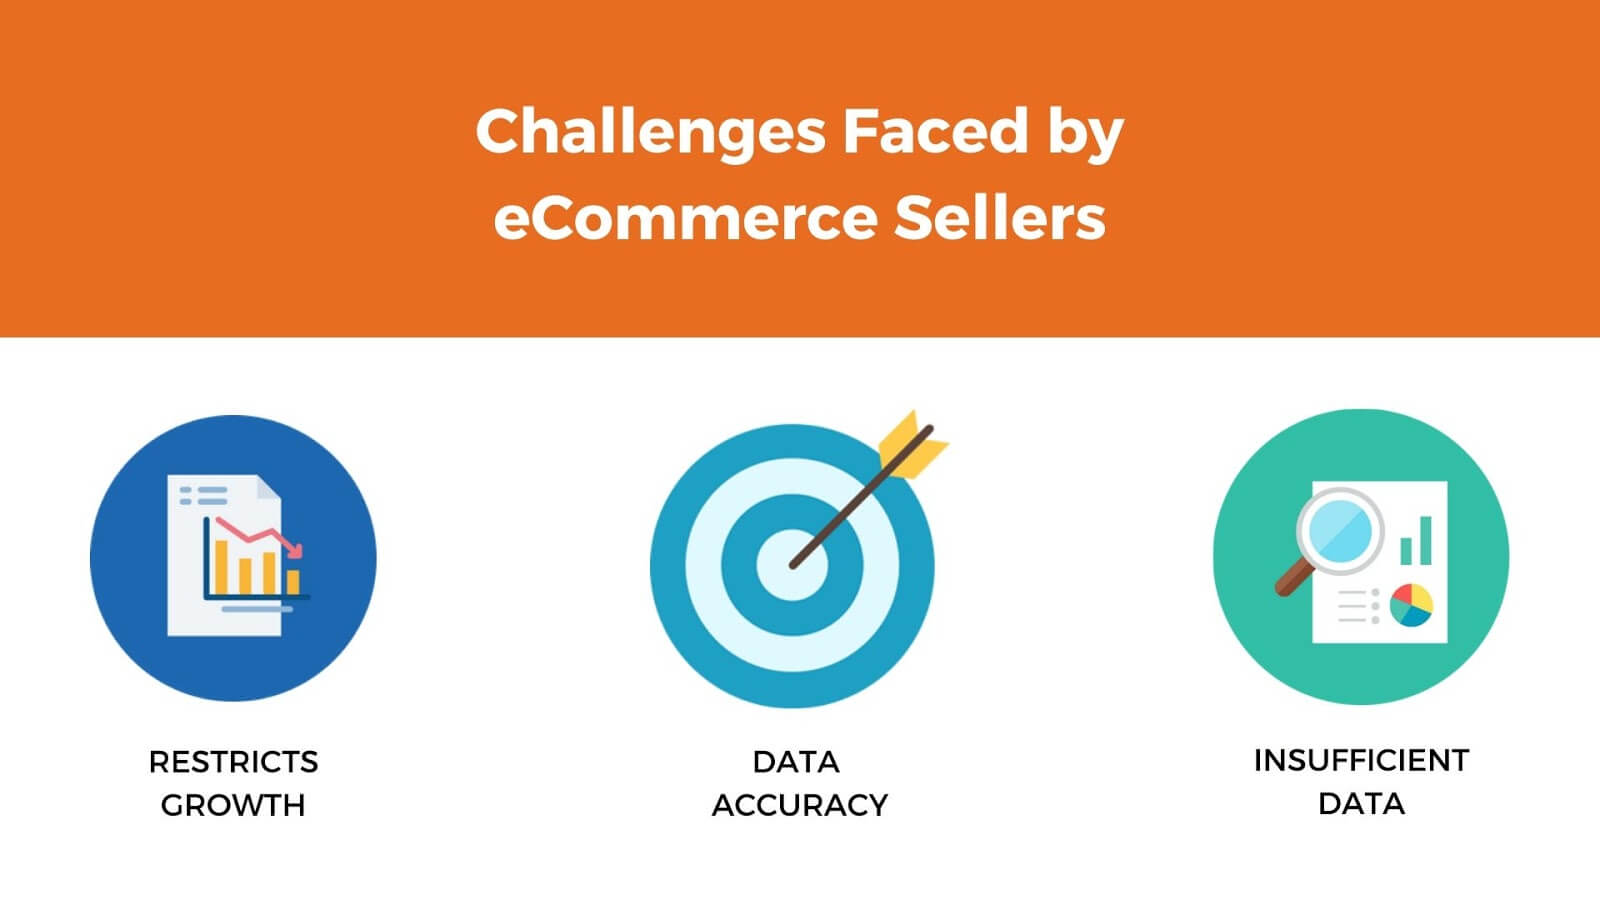 Challenges for eCommerce Sellers